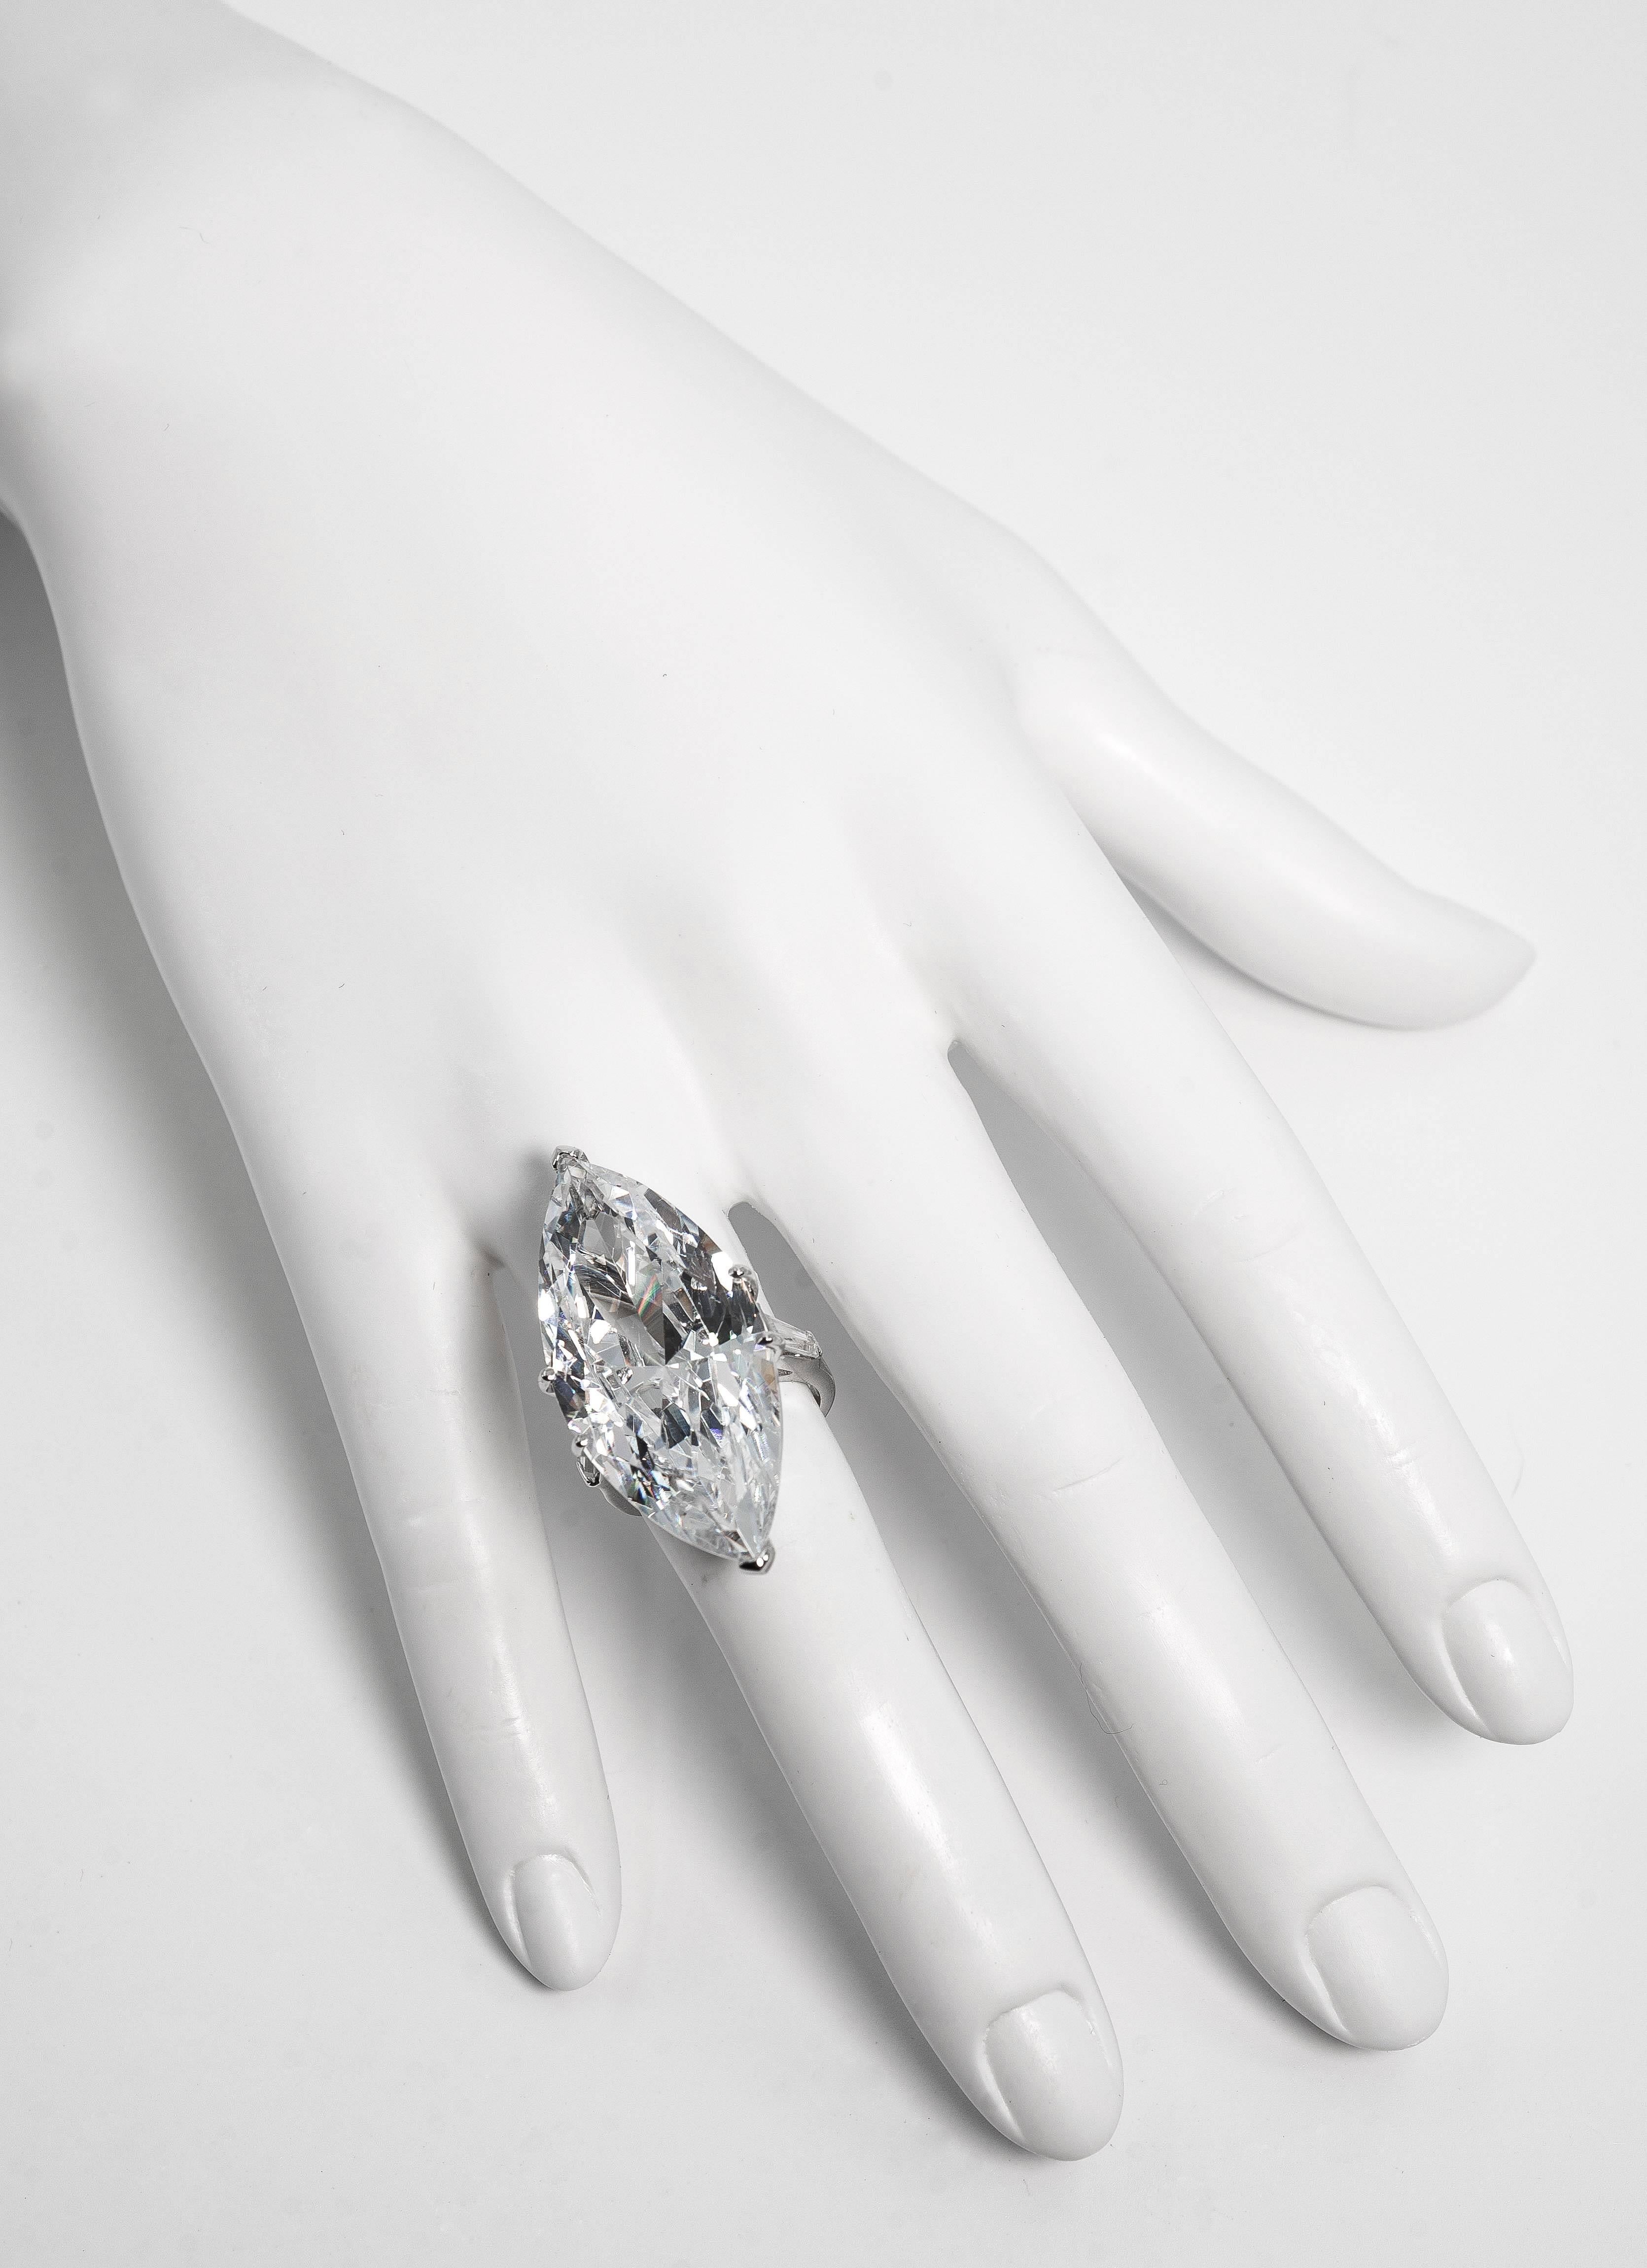  Jackie O' 40 Carat Marquise D Color Cubic Zirconia Diamond Ring Copy 
A Fabulous Fake. One for sale here, one sold at Sotheby's by Daniele Steele that had been bought at Bergdorf's in the 1990s. A copy of the Real One was given to Jackie Onassis by